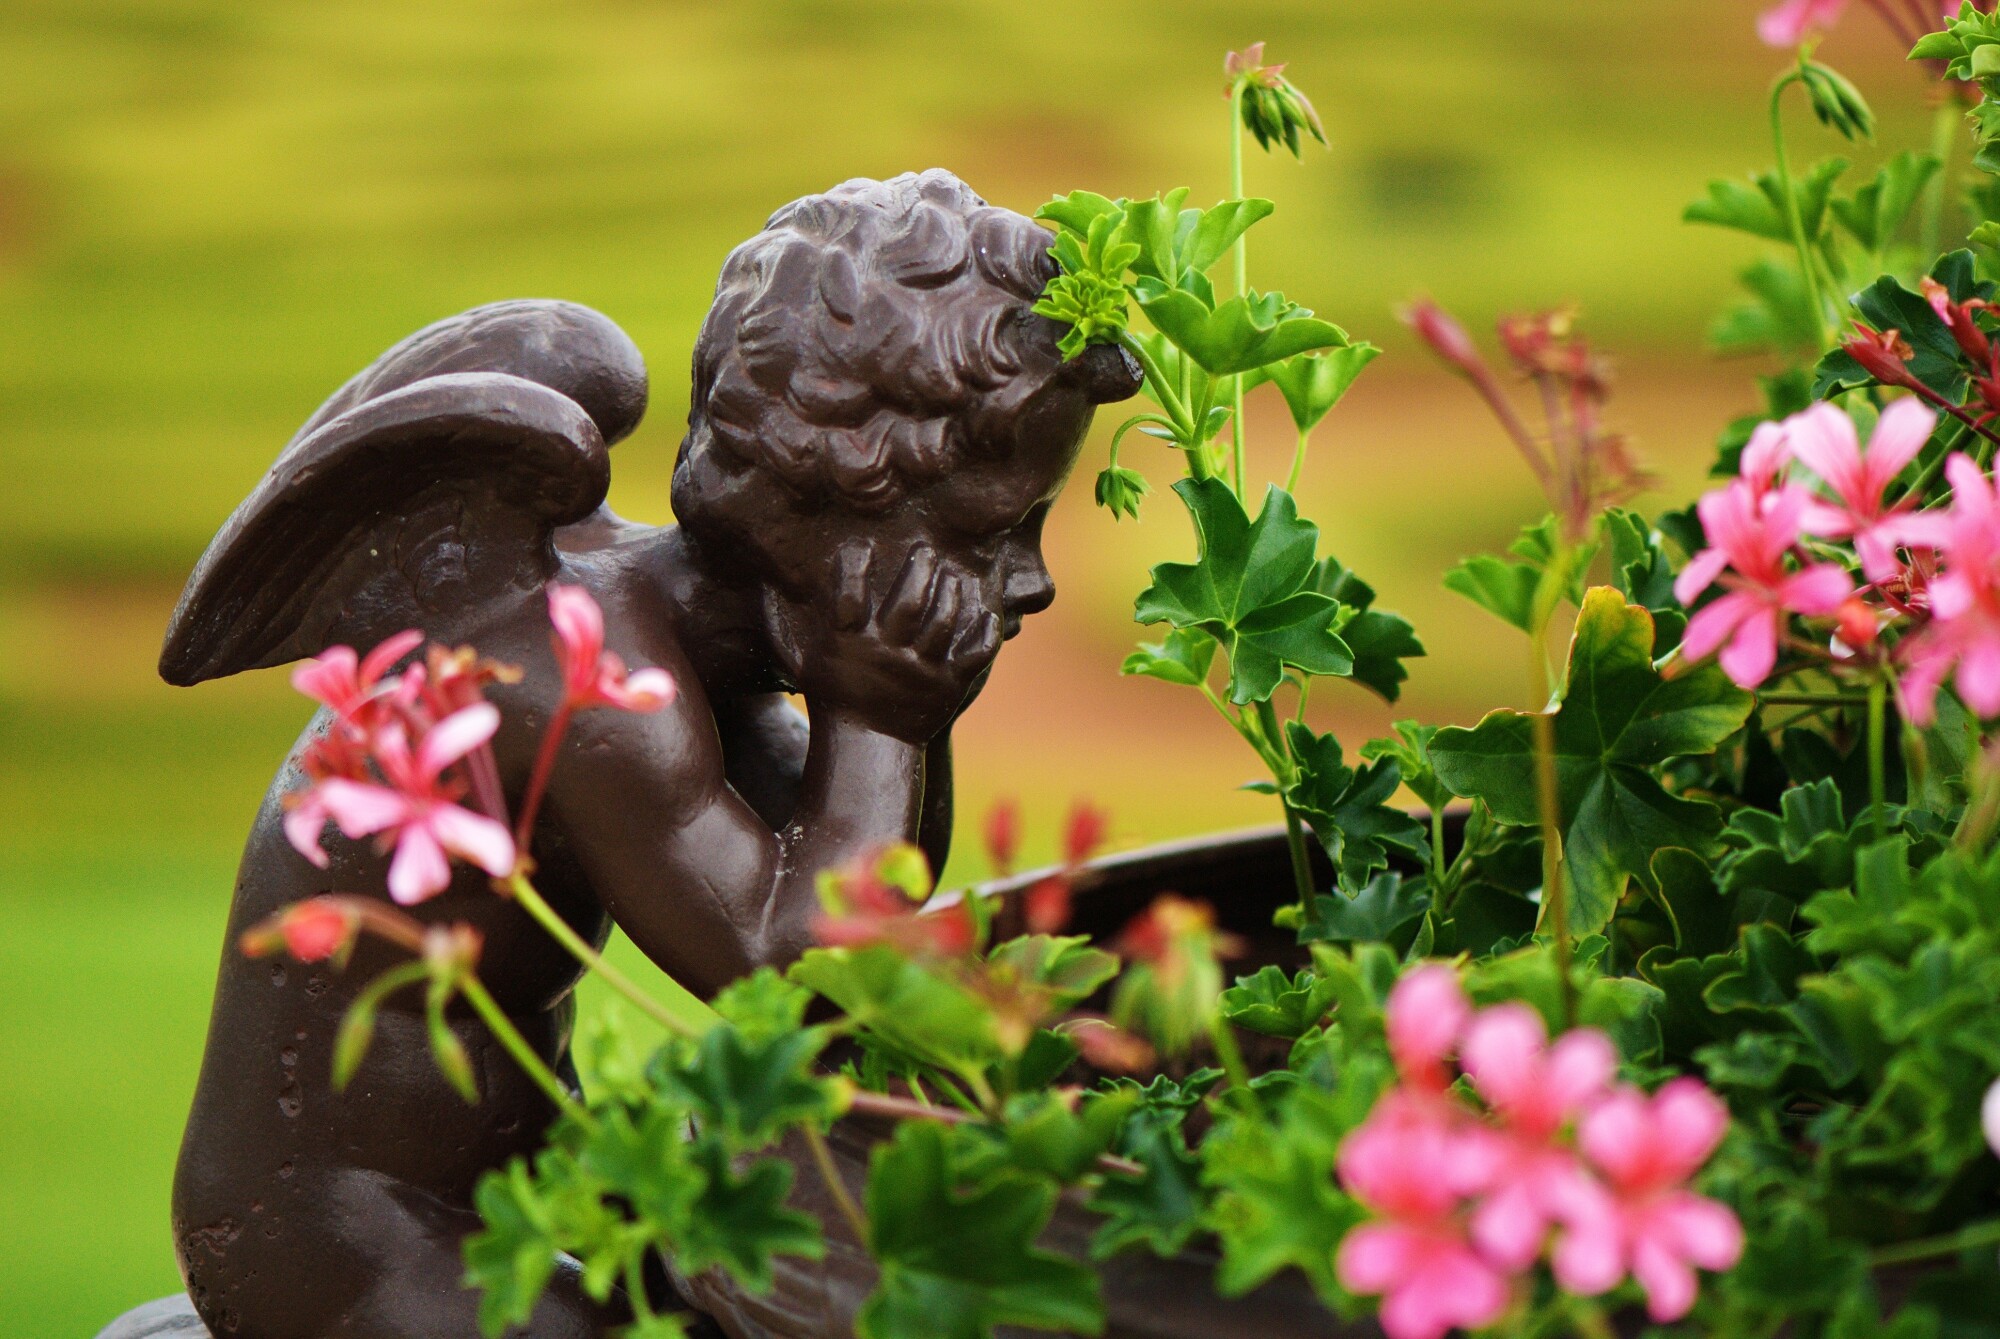 Are you looking for trendy ways to decorate your garden? Learn four of the best garden statue ideas by reading this guide.